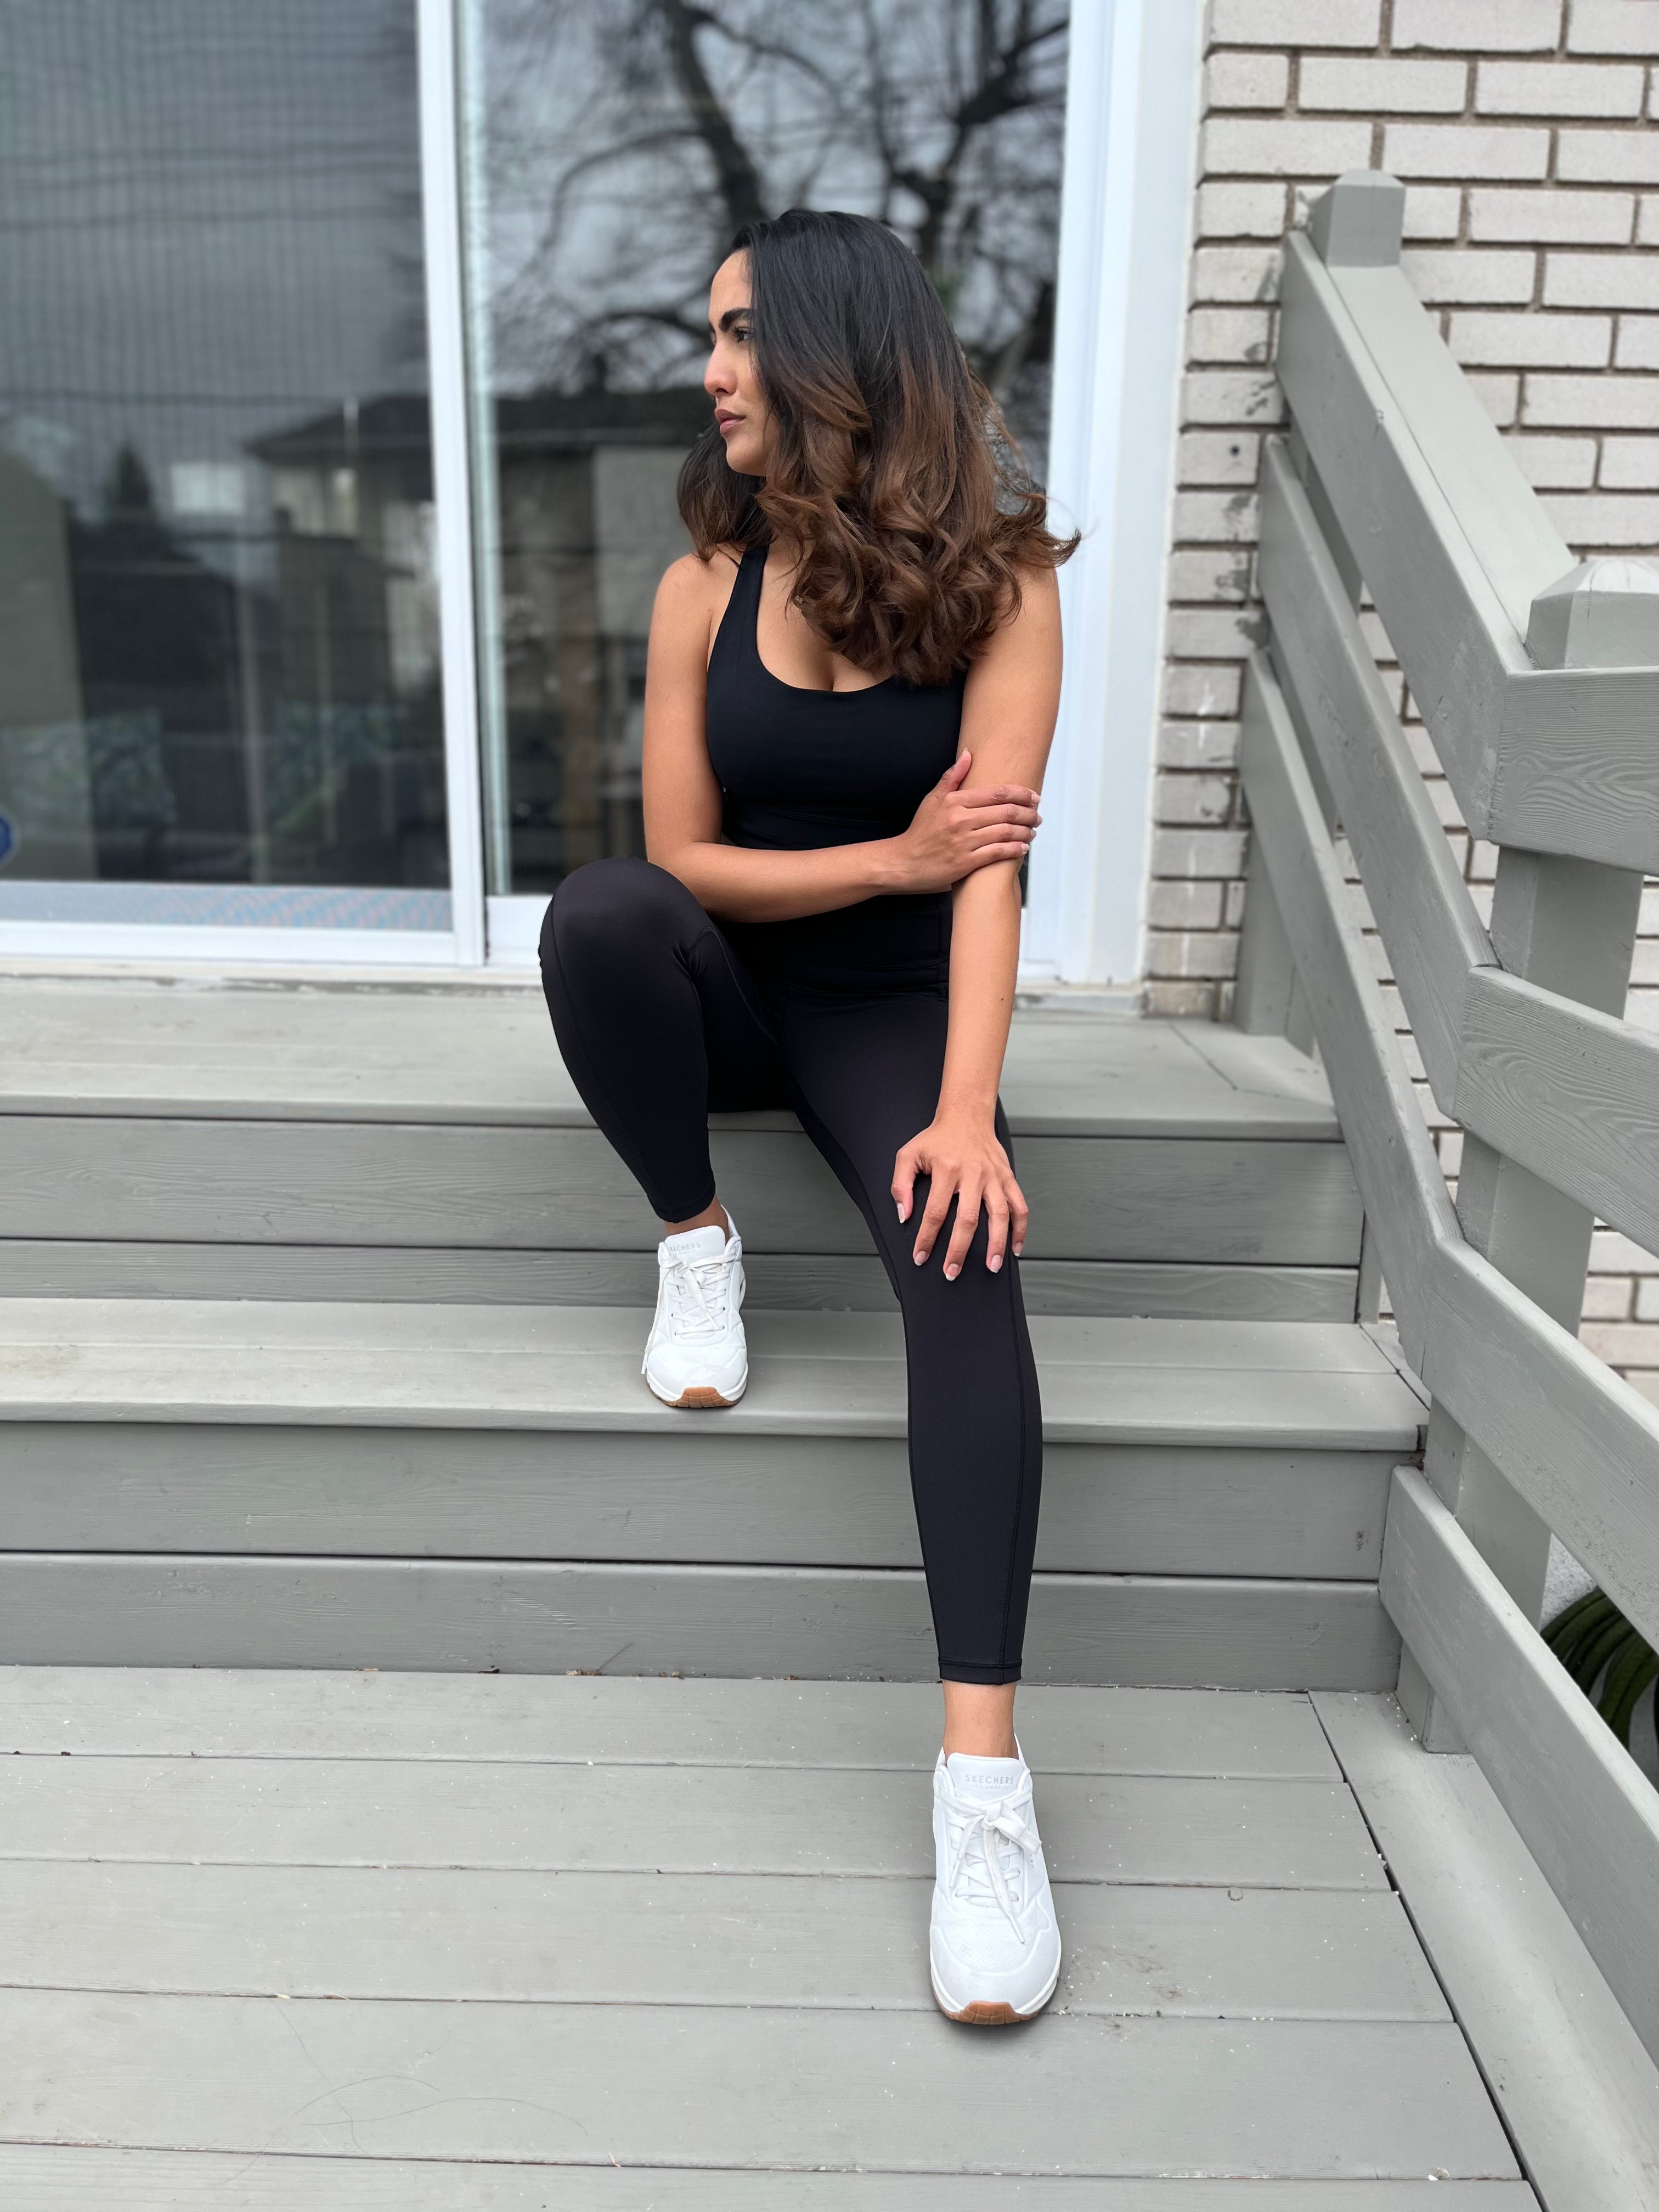 Zella Live In Leggings Review: Why Women are Obsessed